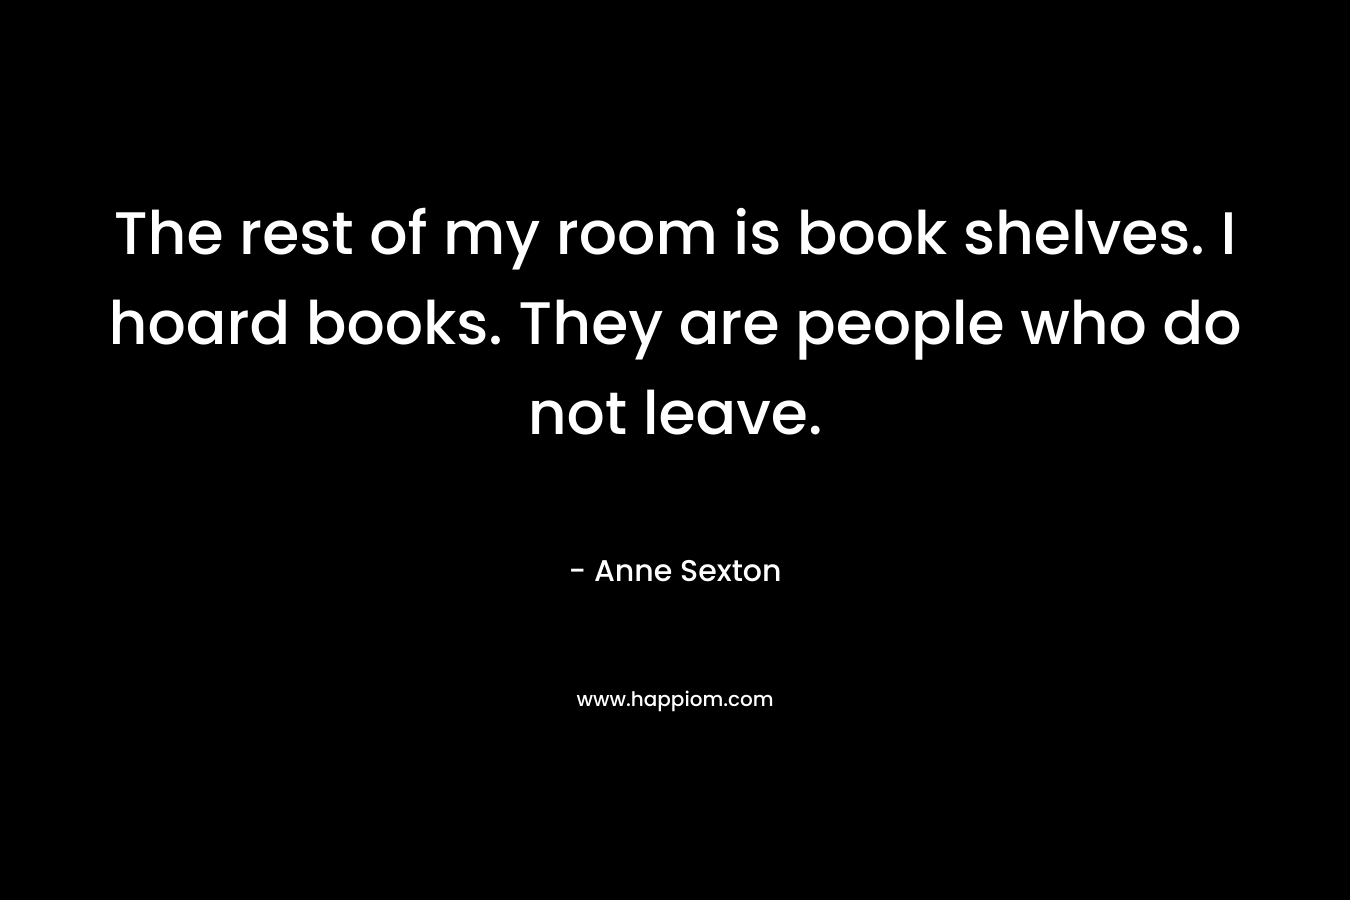 The rest of my room is book shelves. I hoard books. They are people who do not leave. – Anne Sexton